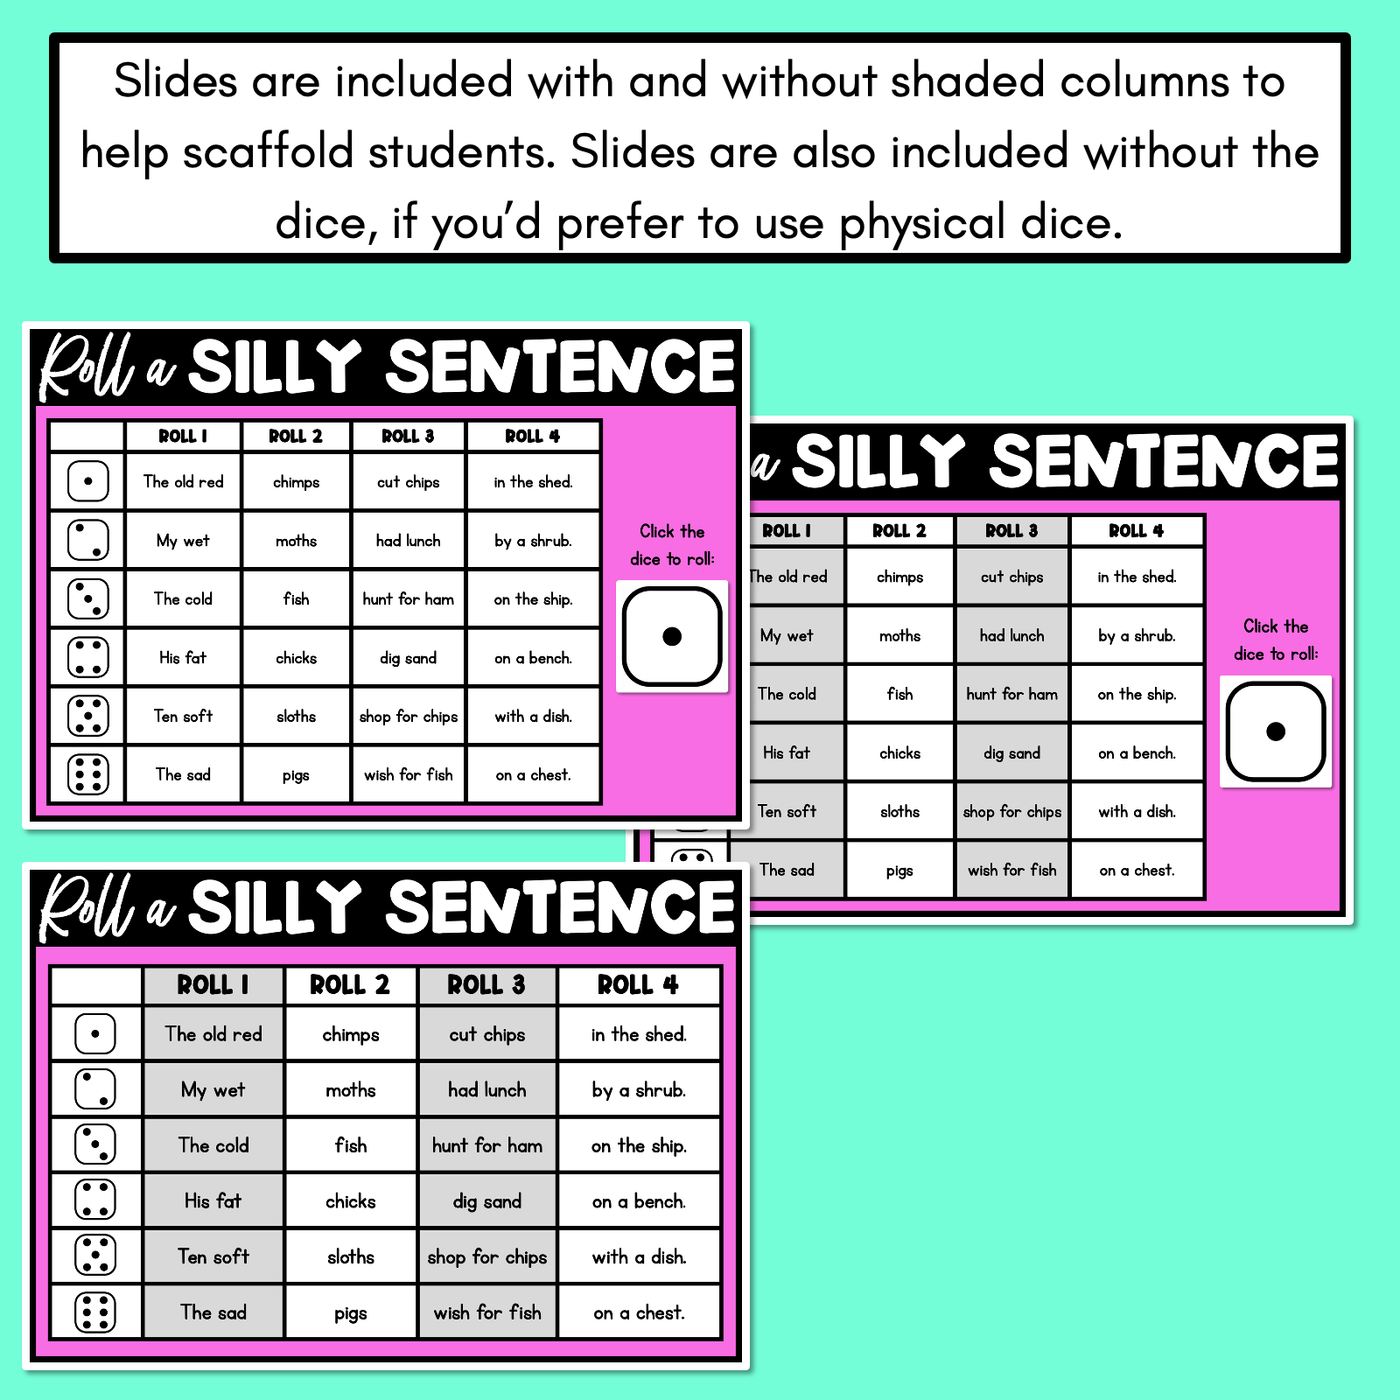 Decodable Sentences with Consonant Digraph Words - DIGITAL Roll a Silly Sentence